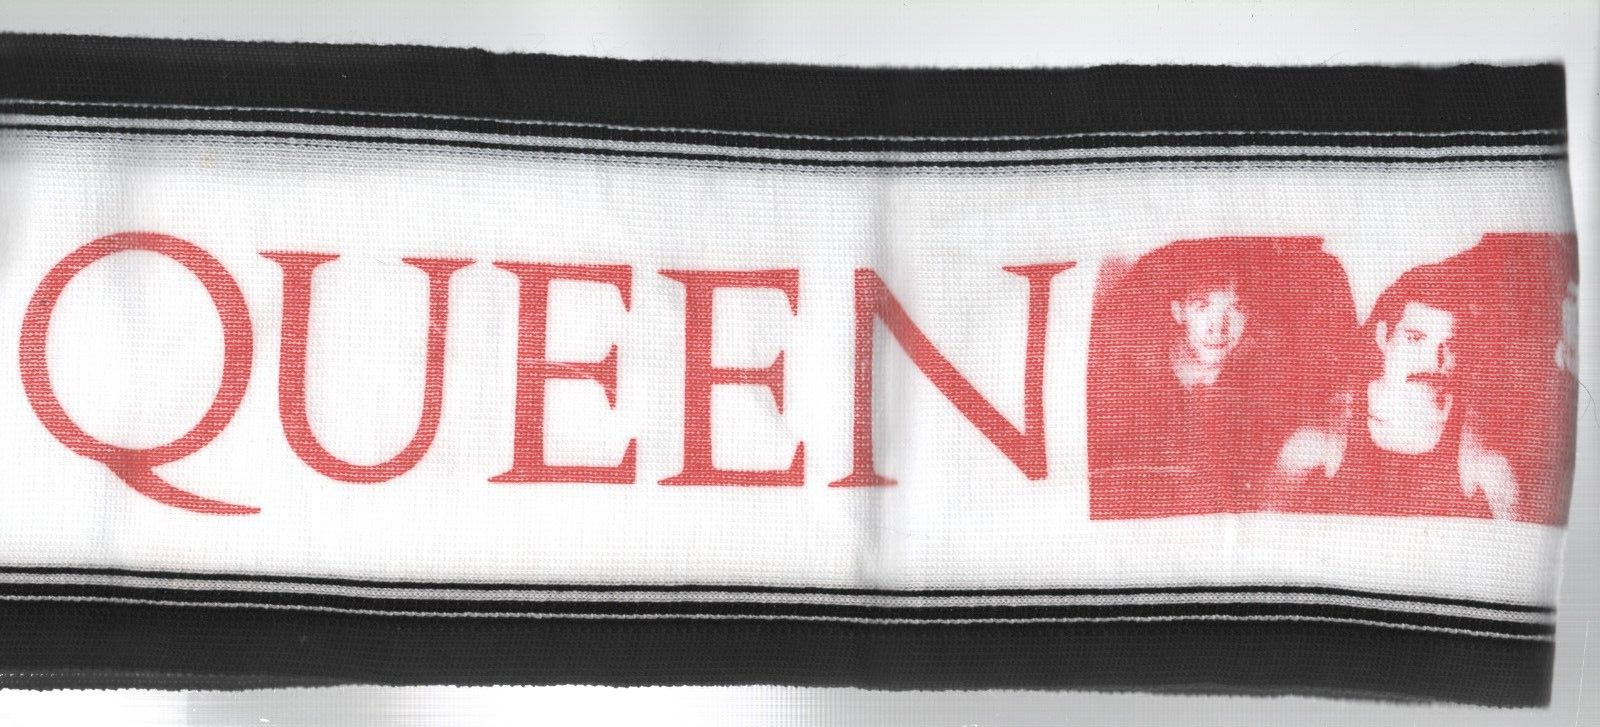 QUEEN Logo & Band Photo SCARF Red & Black on White Vintage